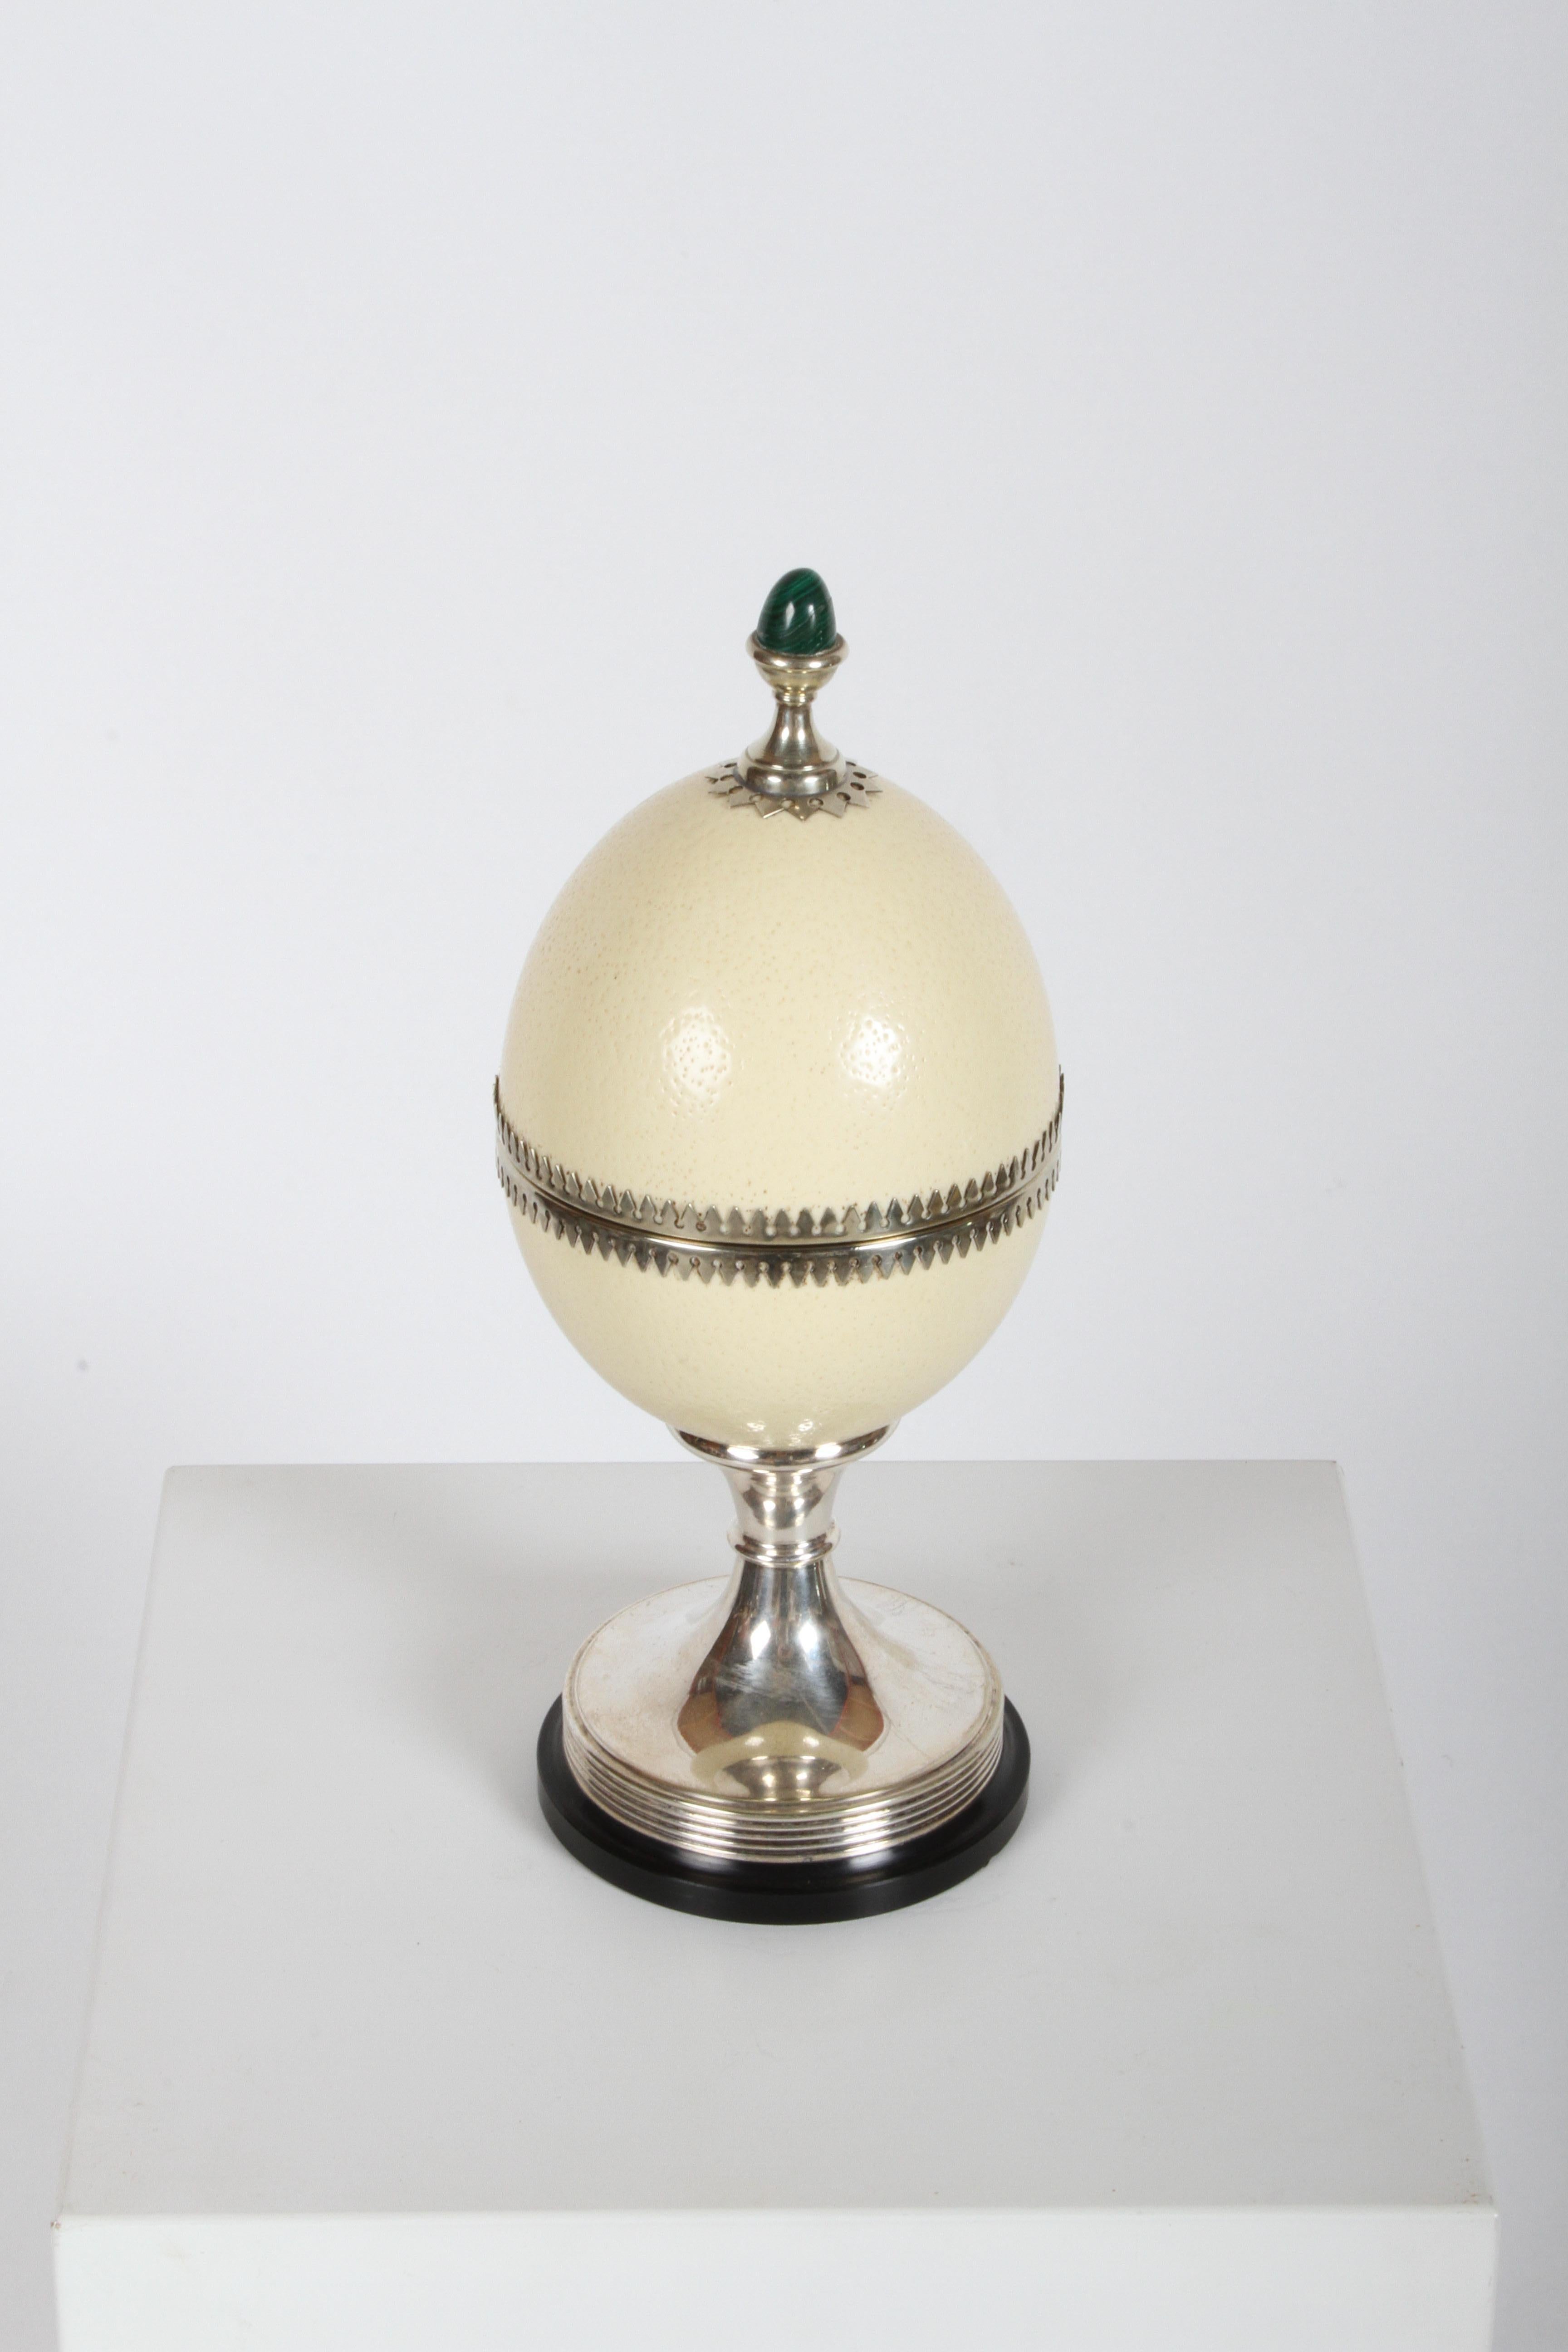 Unique footed ostrich egg box by J. Antony Redmile, accented with silver plate trim work, topped with an egg-shaped malachite finial and set atop a black lacquered wood base. Unsigned, but no doubt by Redmile. Often misspelled as Anthony Redmile,